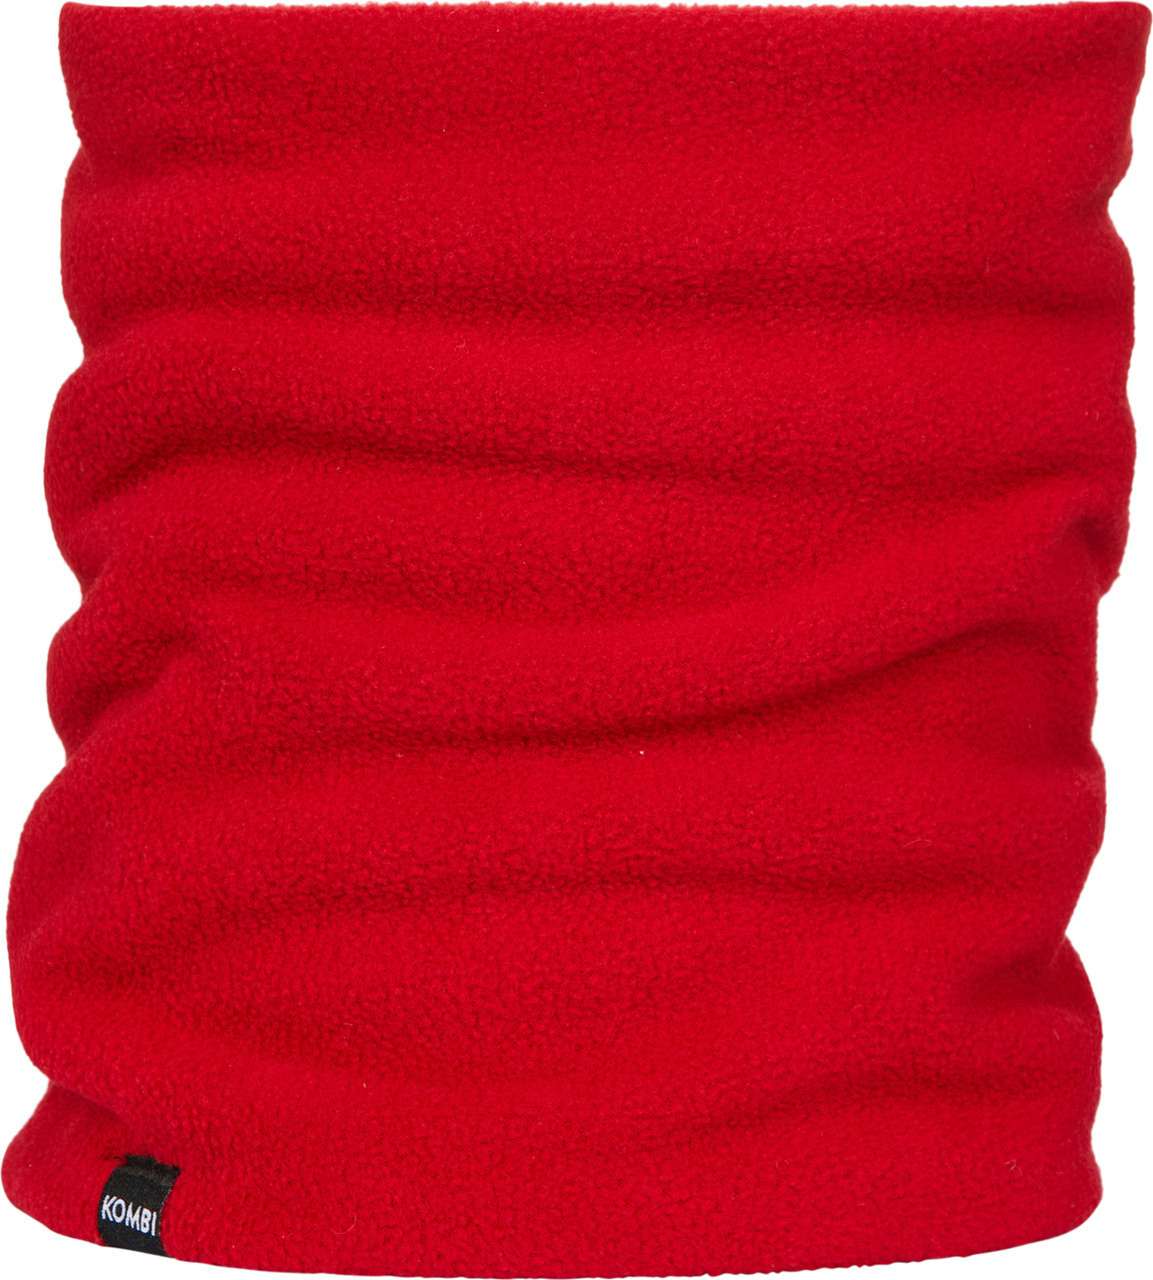 The Comfiest Neck Warmer Ruby